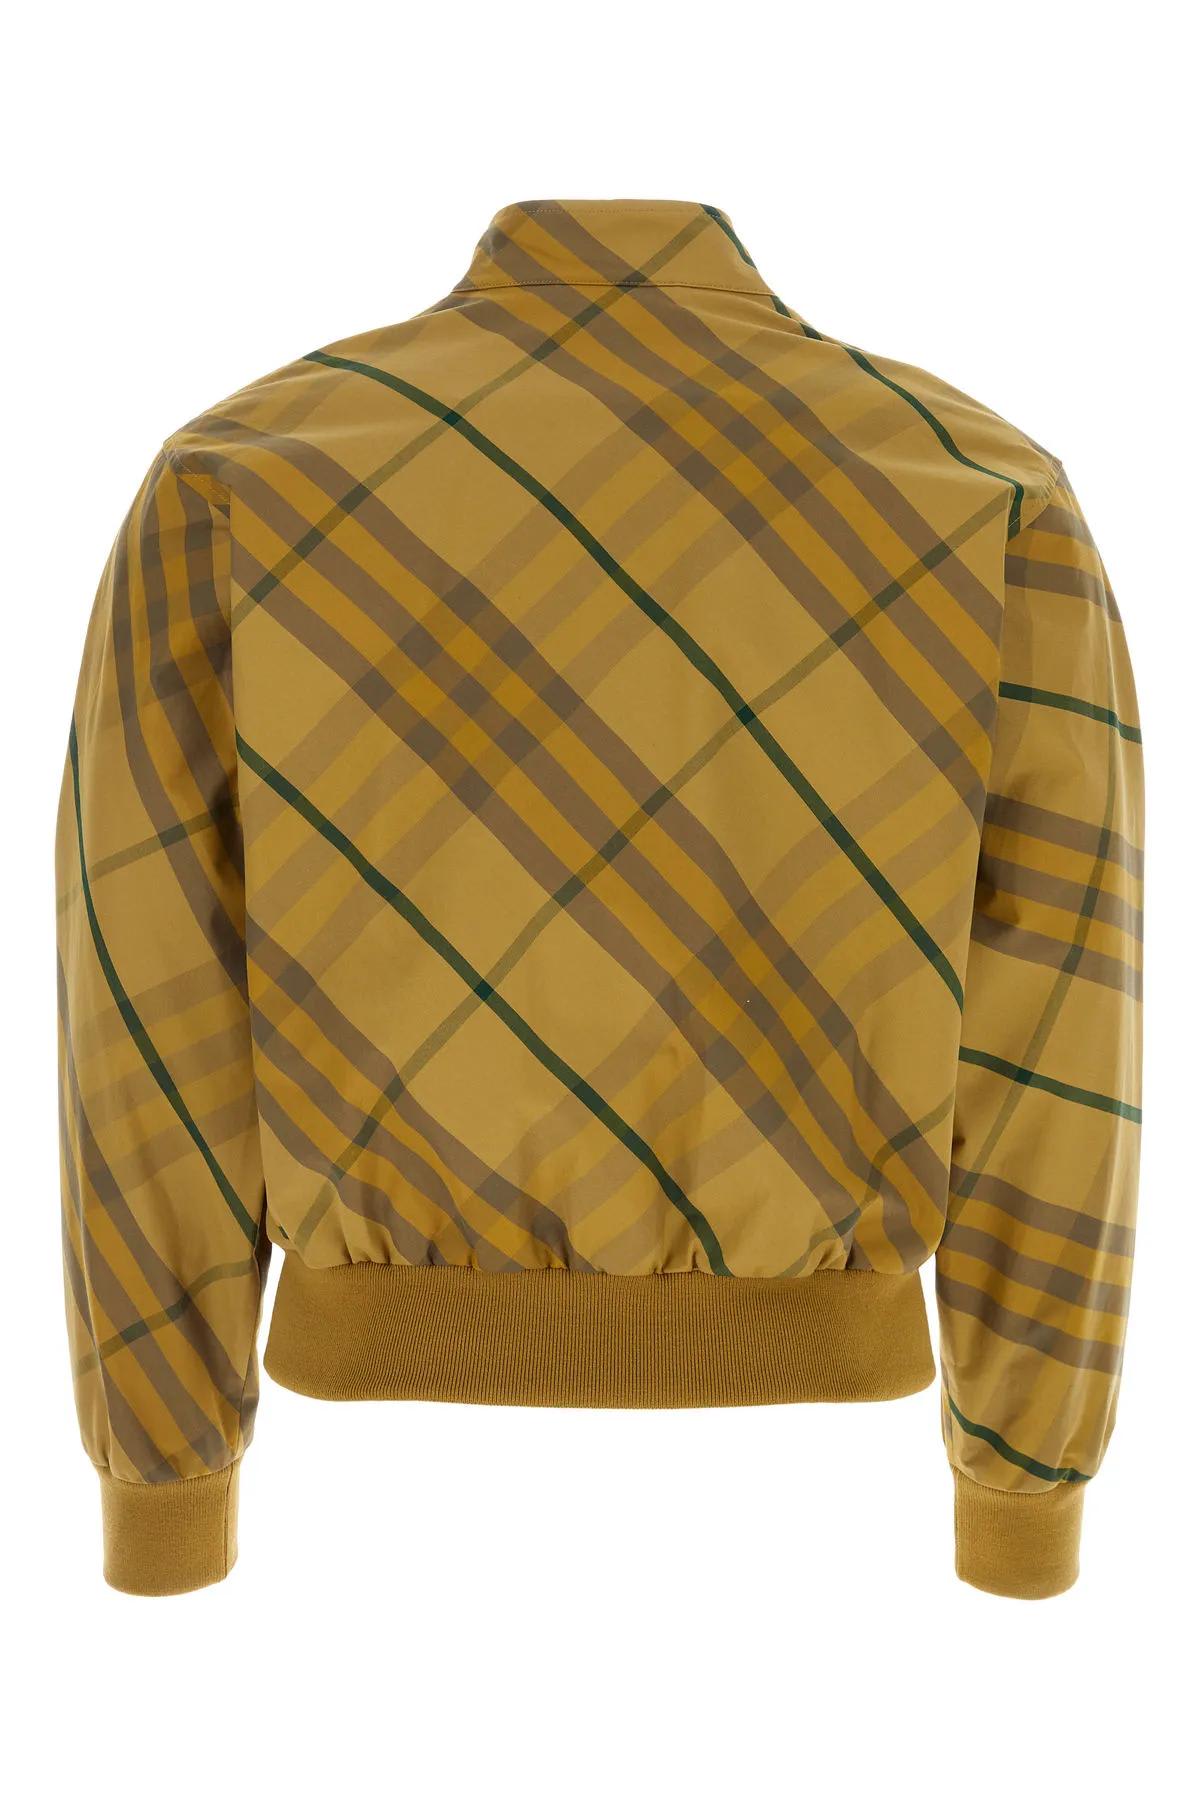 Shop Burberry Embroidered Cotton Bomber Jacket